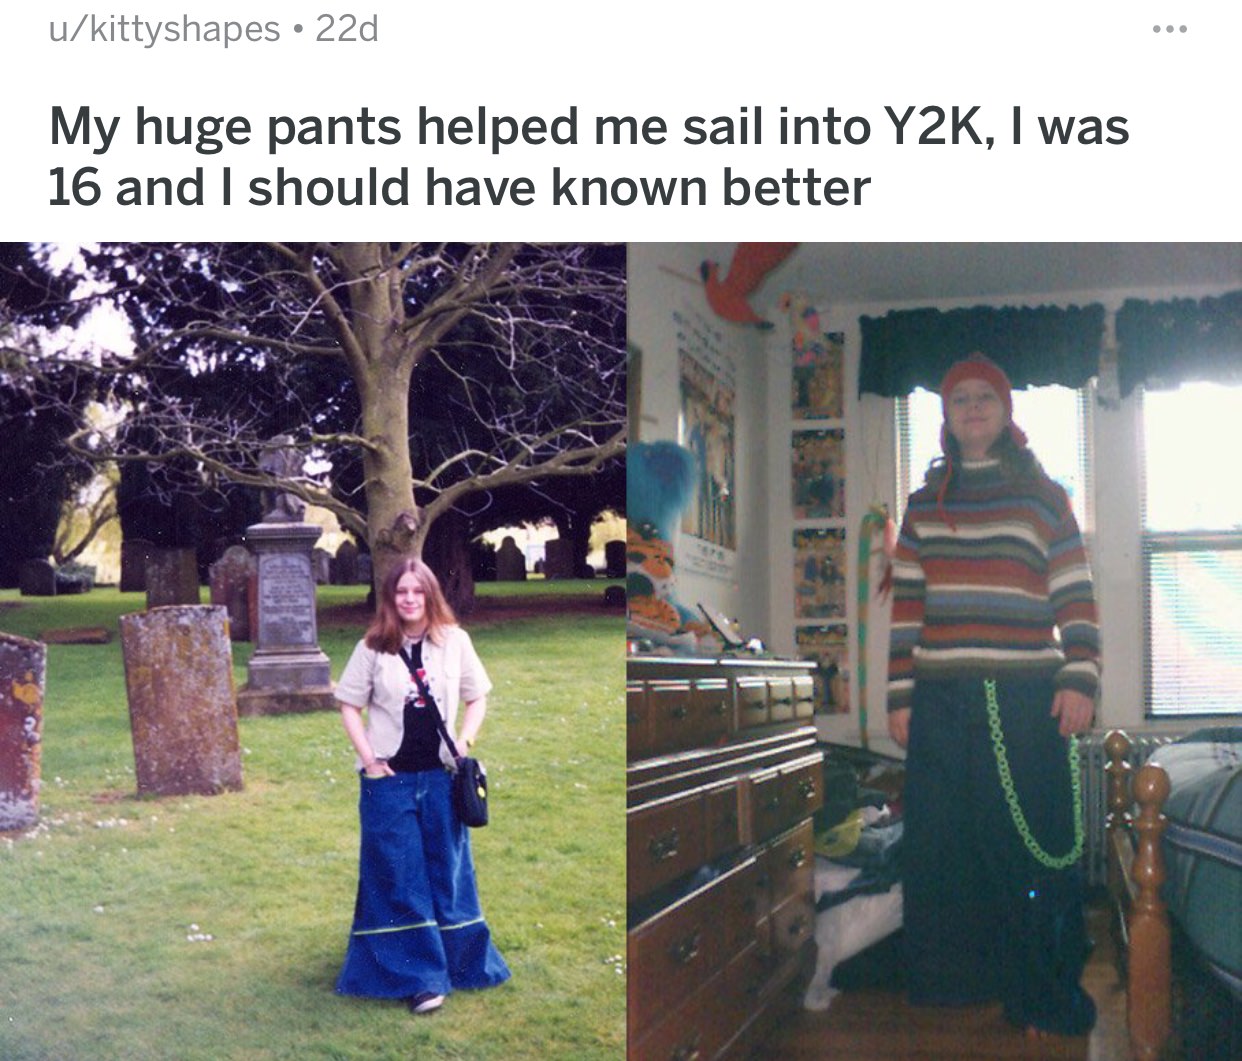 y2k pants - ukittyshapes 22d My huge pants helped me sail into Y2K, I was 16 and I should have known better Goodoo